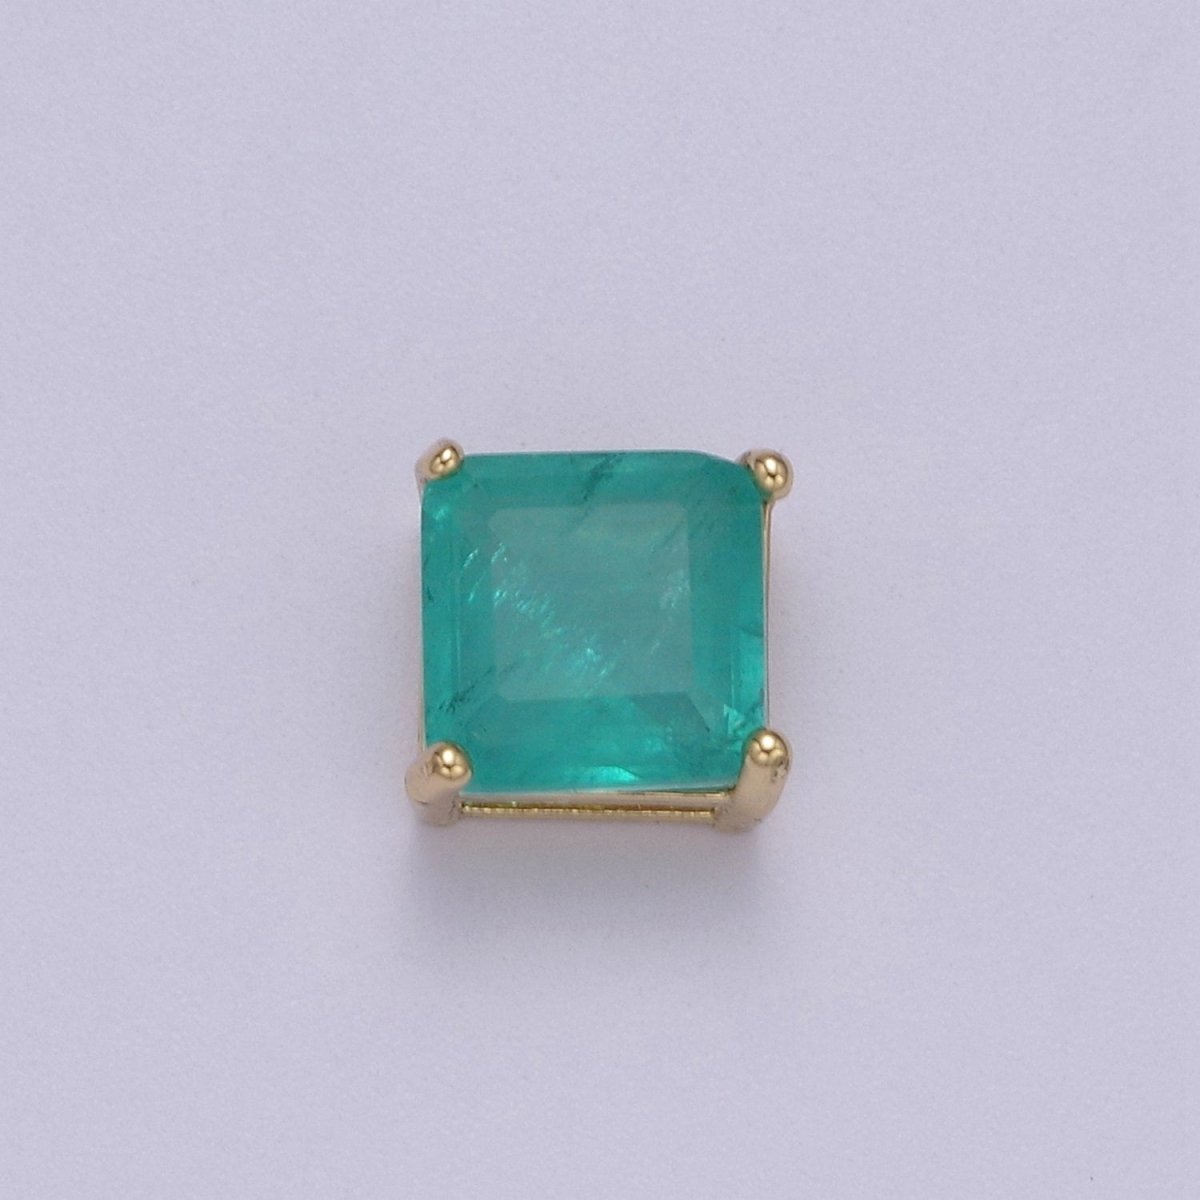 Green Aqua Cubic Zirconia Square Charm 8.7x8.5mm Small Beautiful Bright 3D Love Jewelry Gold Beads spacer for Bracelet Necklace Supply B-462 - DLUXCA